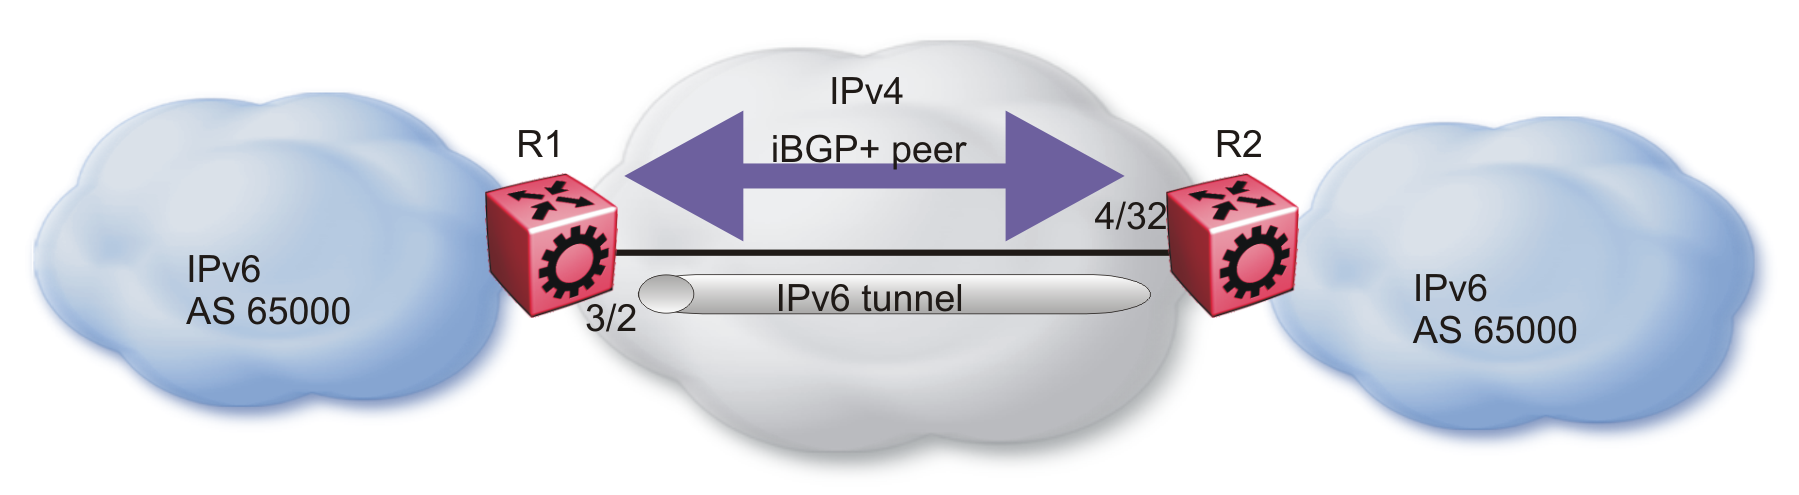 iBGP+ peers on CLIP interfaces with IPv6 tunneling